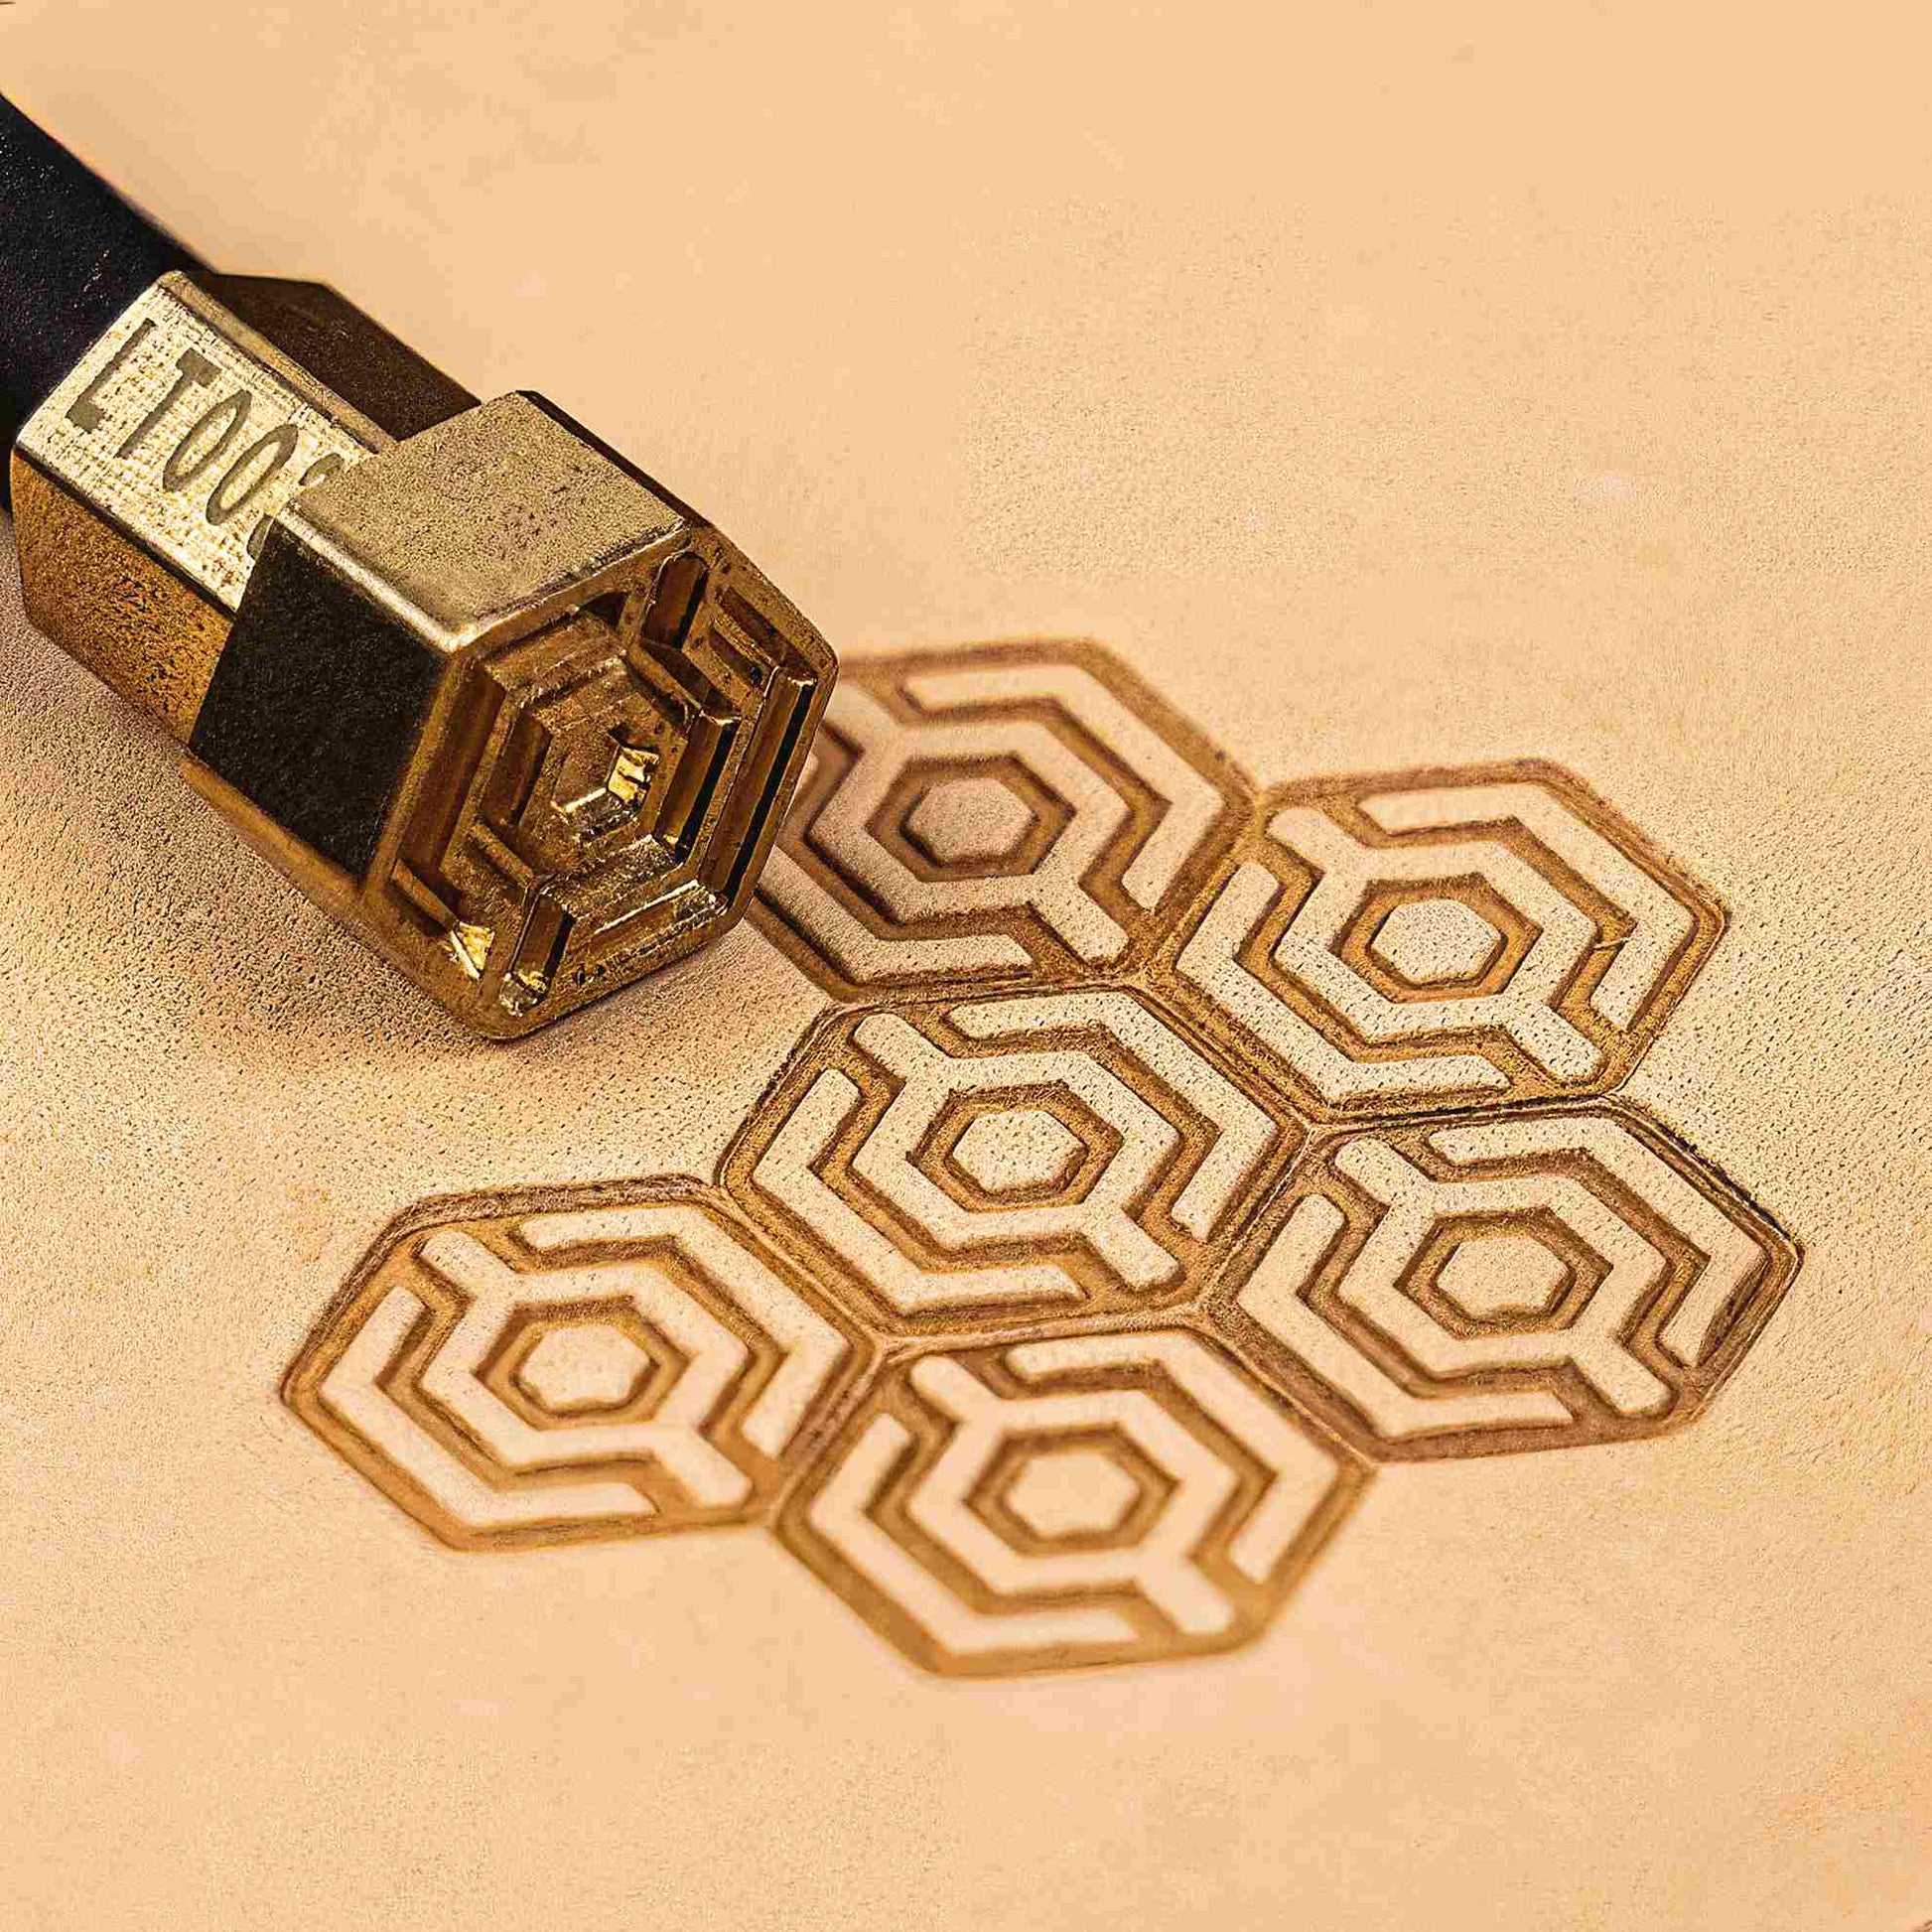 Leather Stamping Tool LT003 14x13mm from Geometric Leather Stamp collection, stamp leather tool and multiple imprint on leather, modern Geometric design